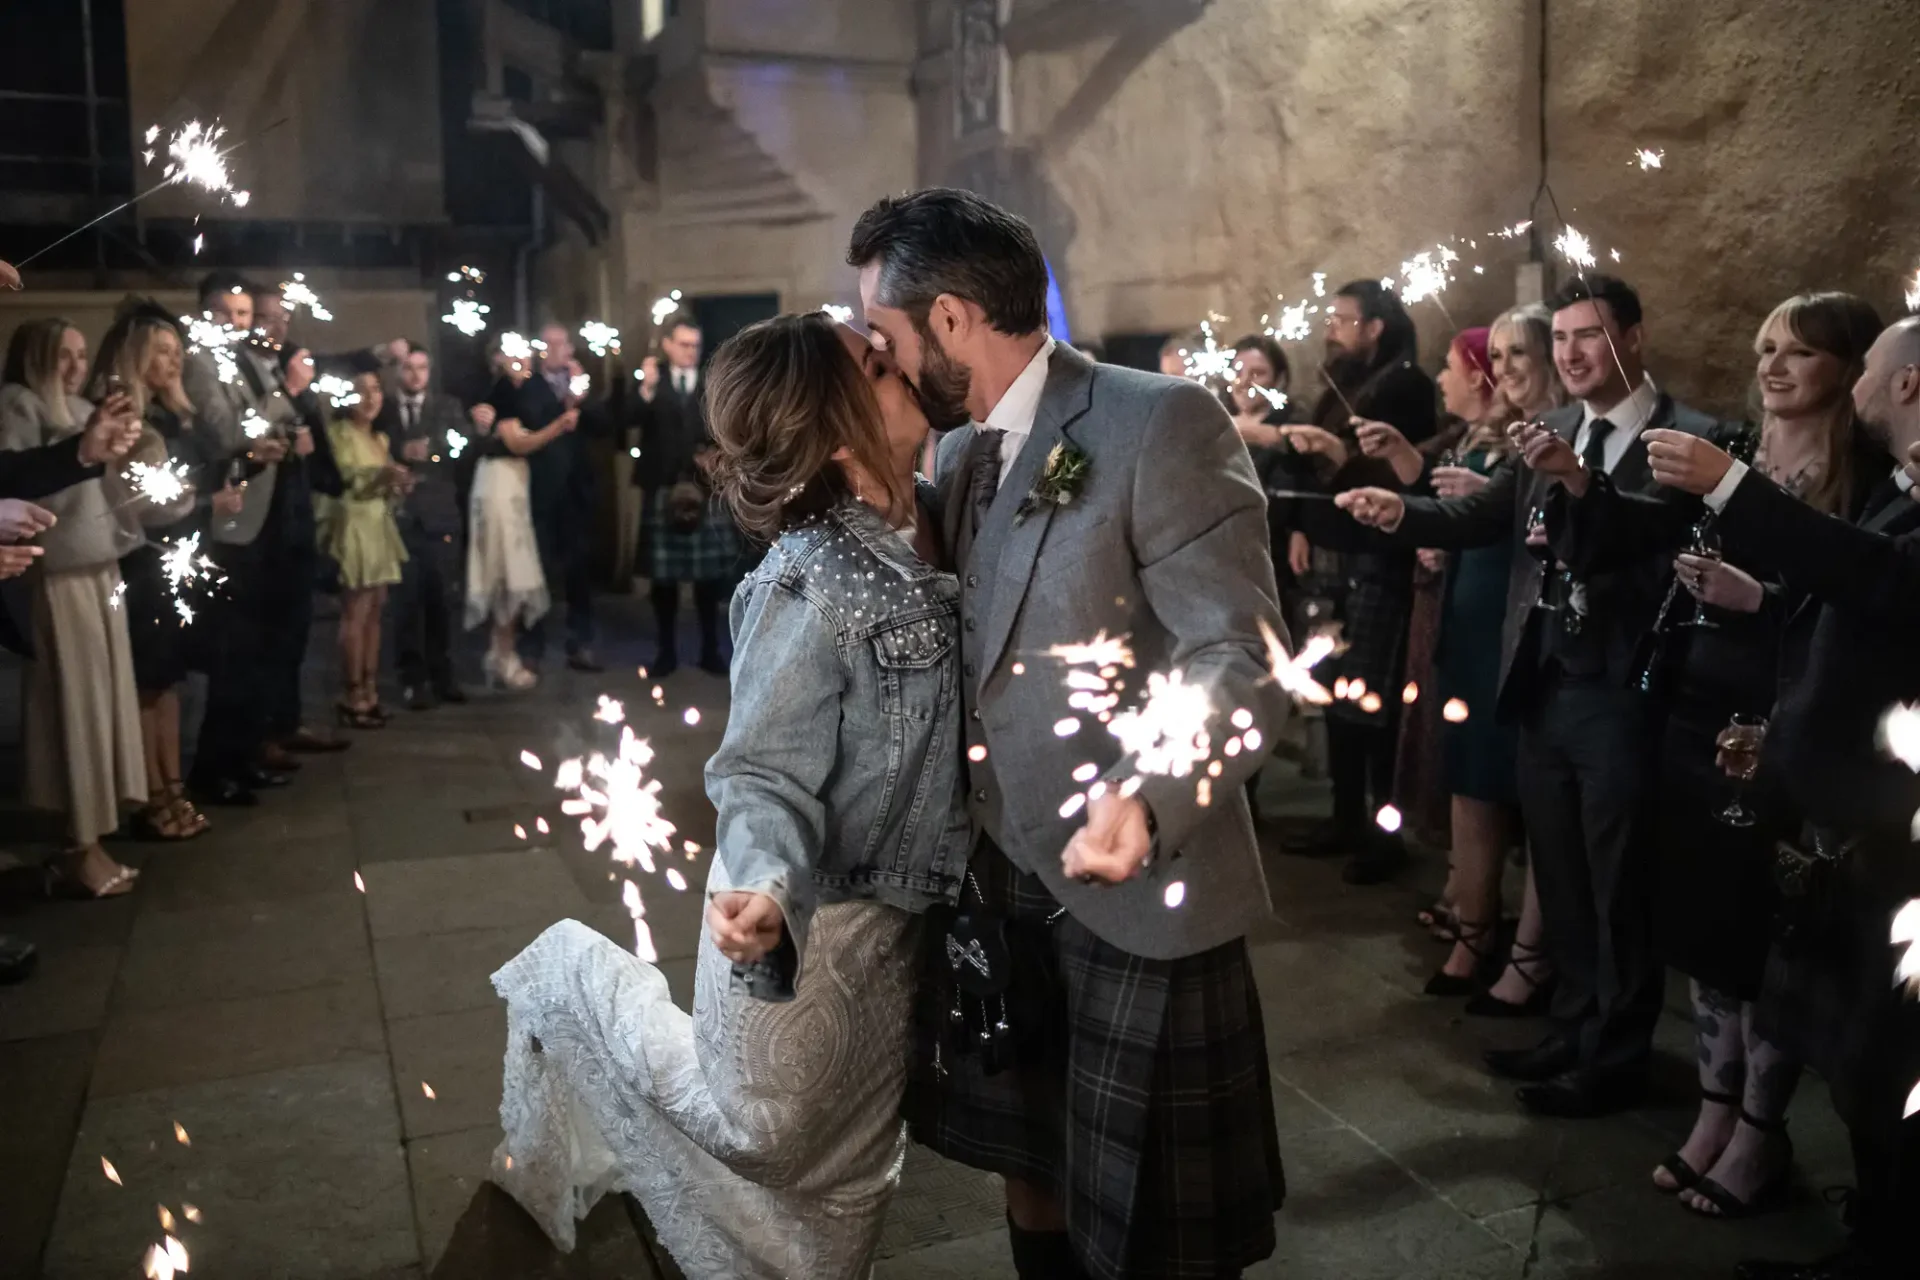 A couple kissing during a sparkler send-off at night, surrounded by guests in a festive setting.